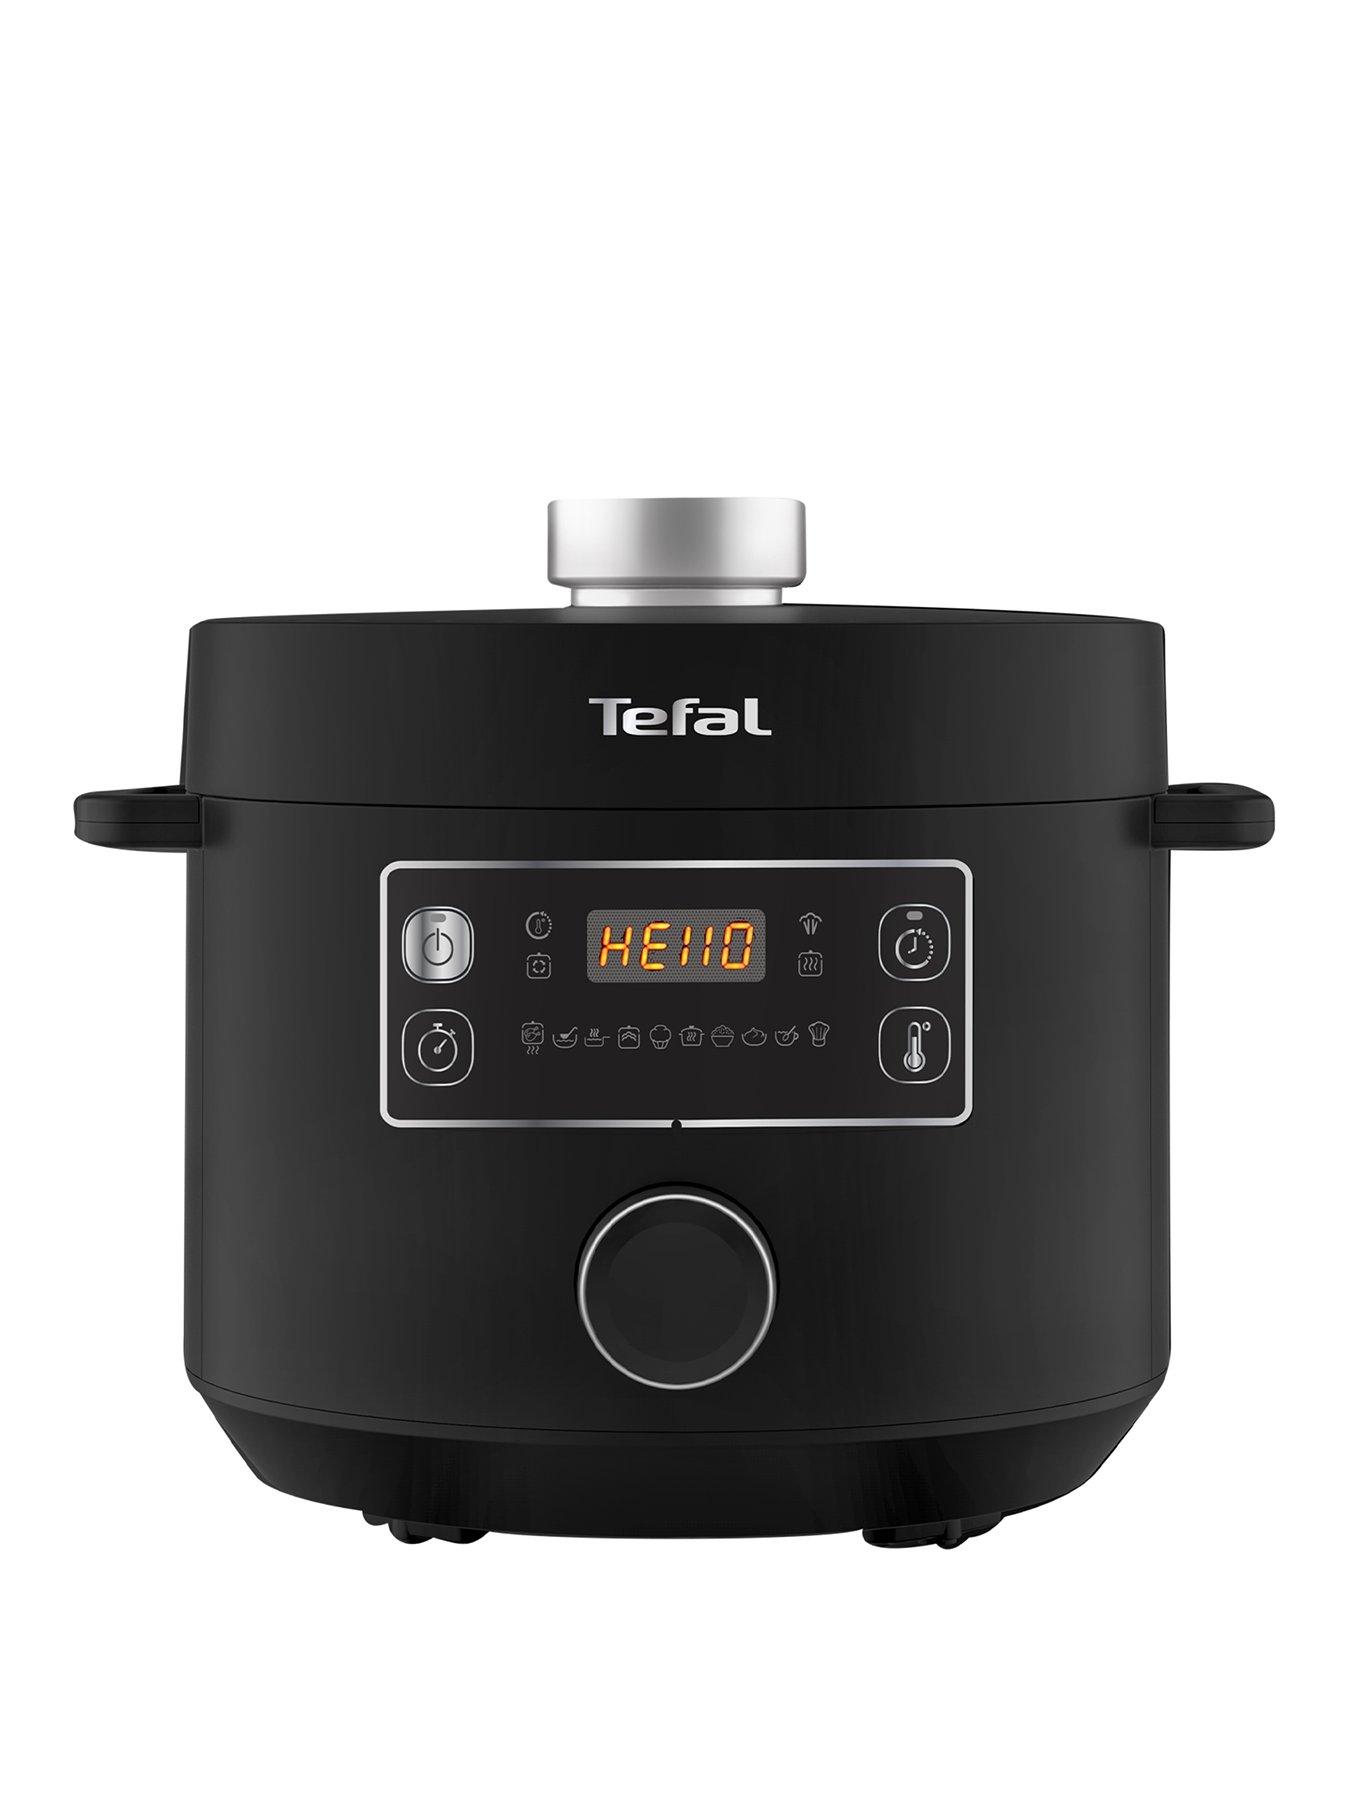 Tefal Turbo Cuisine 4.8L 10In1 Electric Pressure Cooker Cy754840